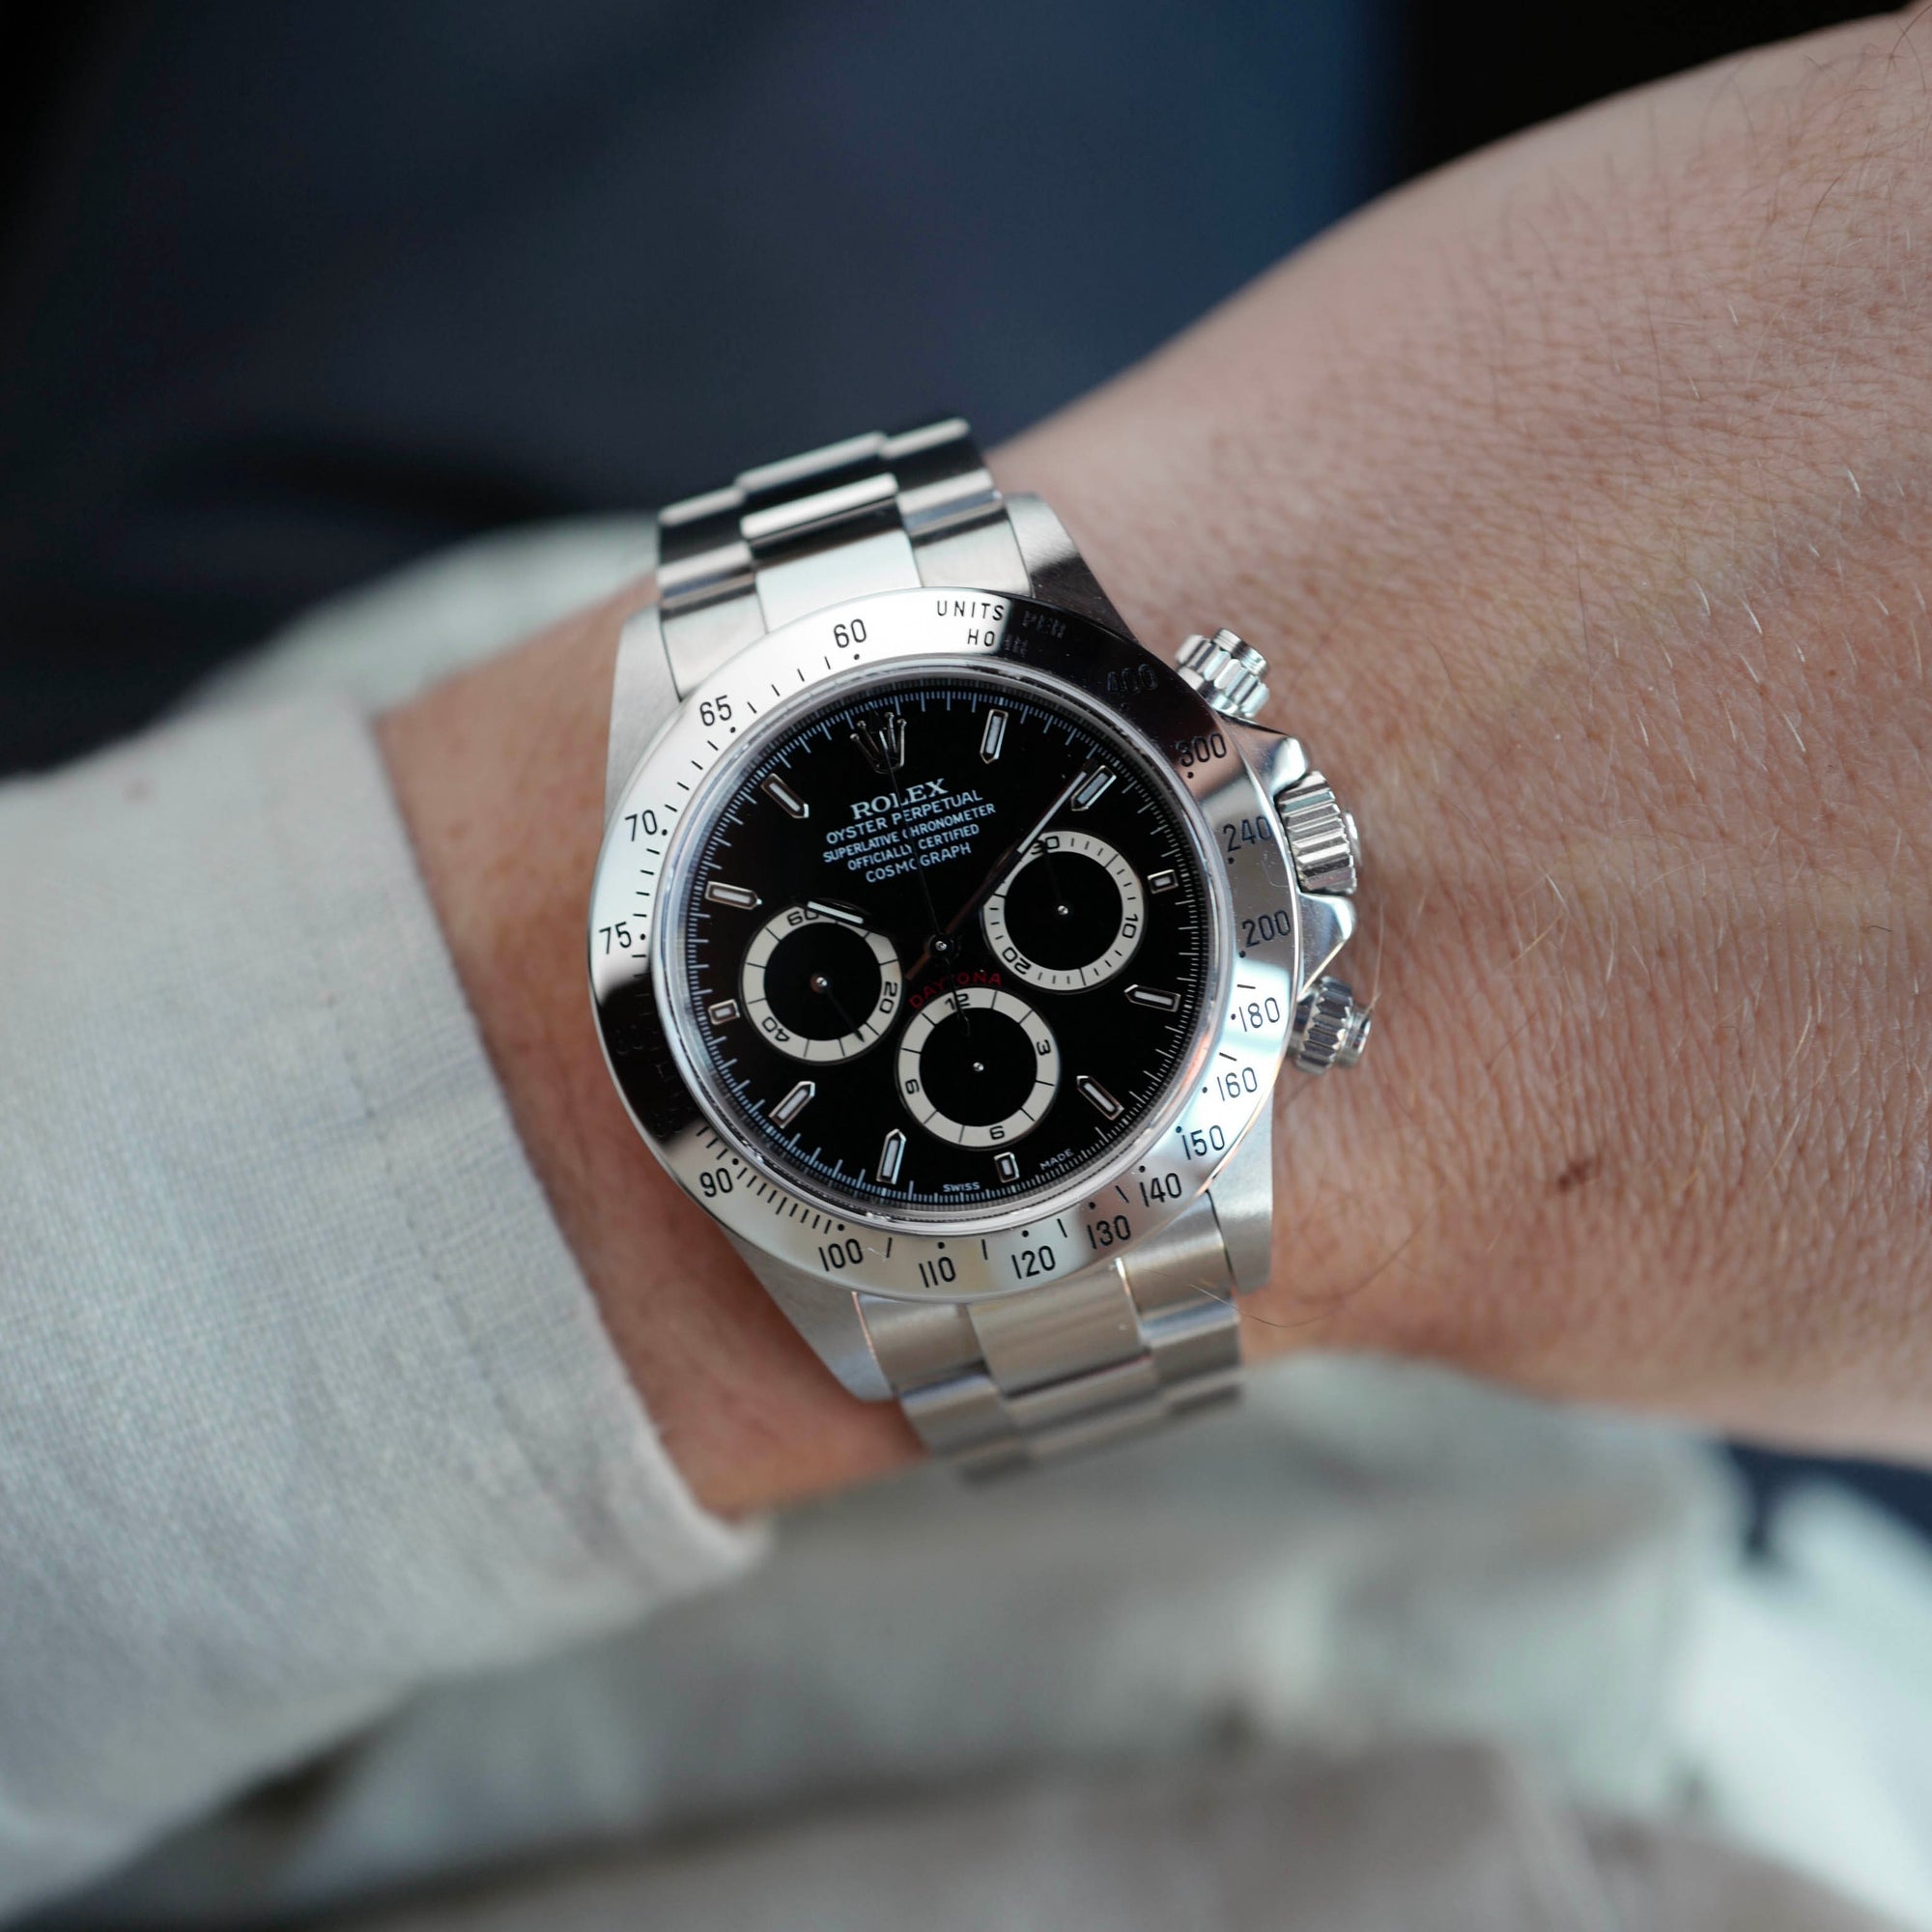 Rolex - Rolex Steel Zenith Daytona Ref. 16520 in New Old Stock Condition with Papers (NEW ARRIVAL) - The Keystone Watches